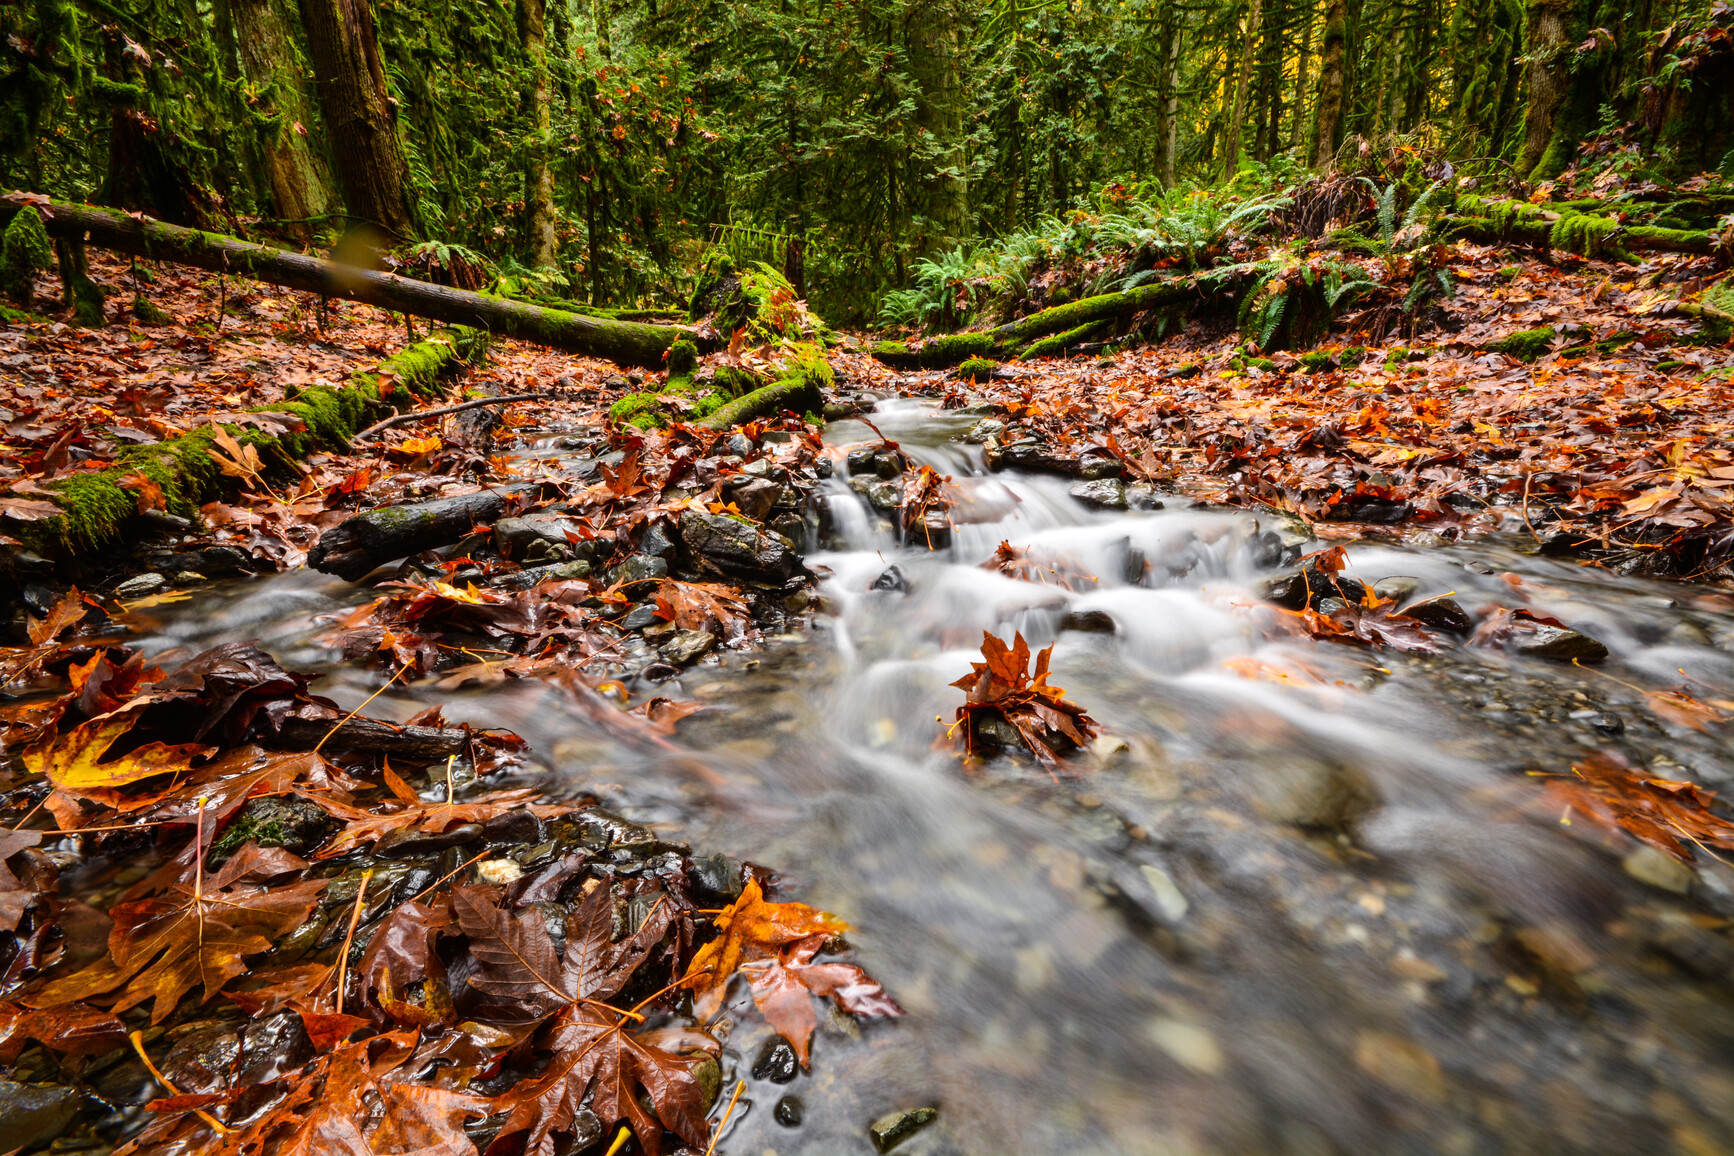 Bridal Creek flowing through the forest. Moss covers fallen logs and autumn leaves cover the ground.